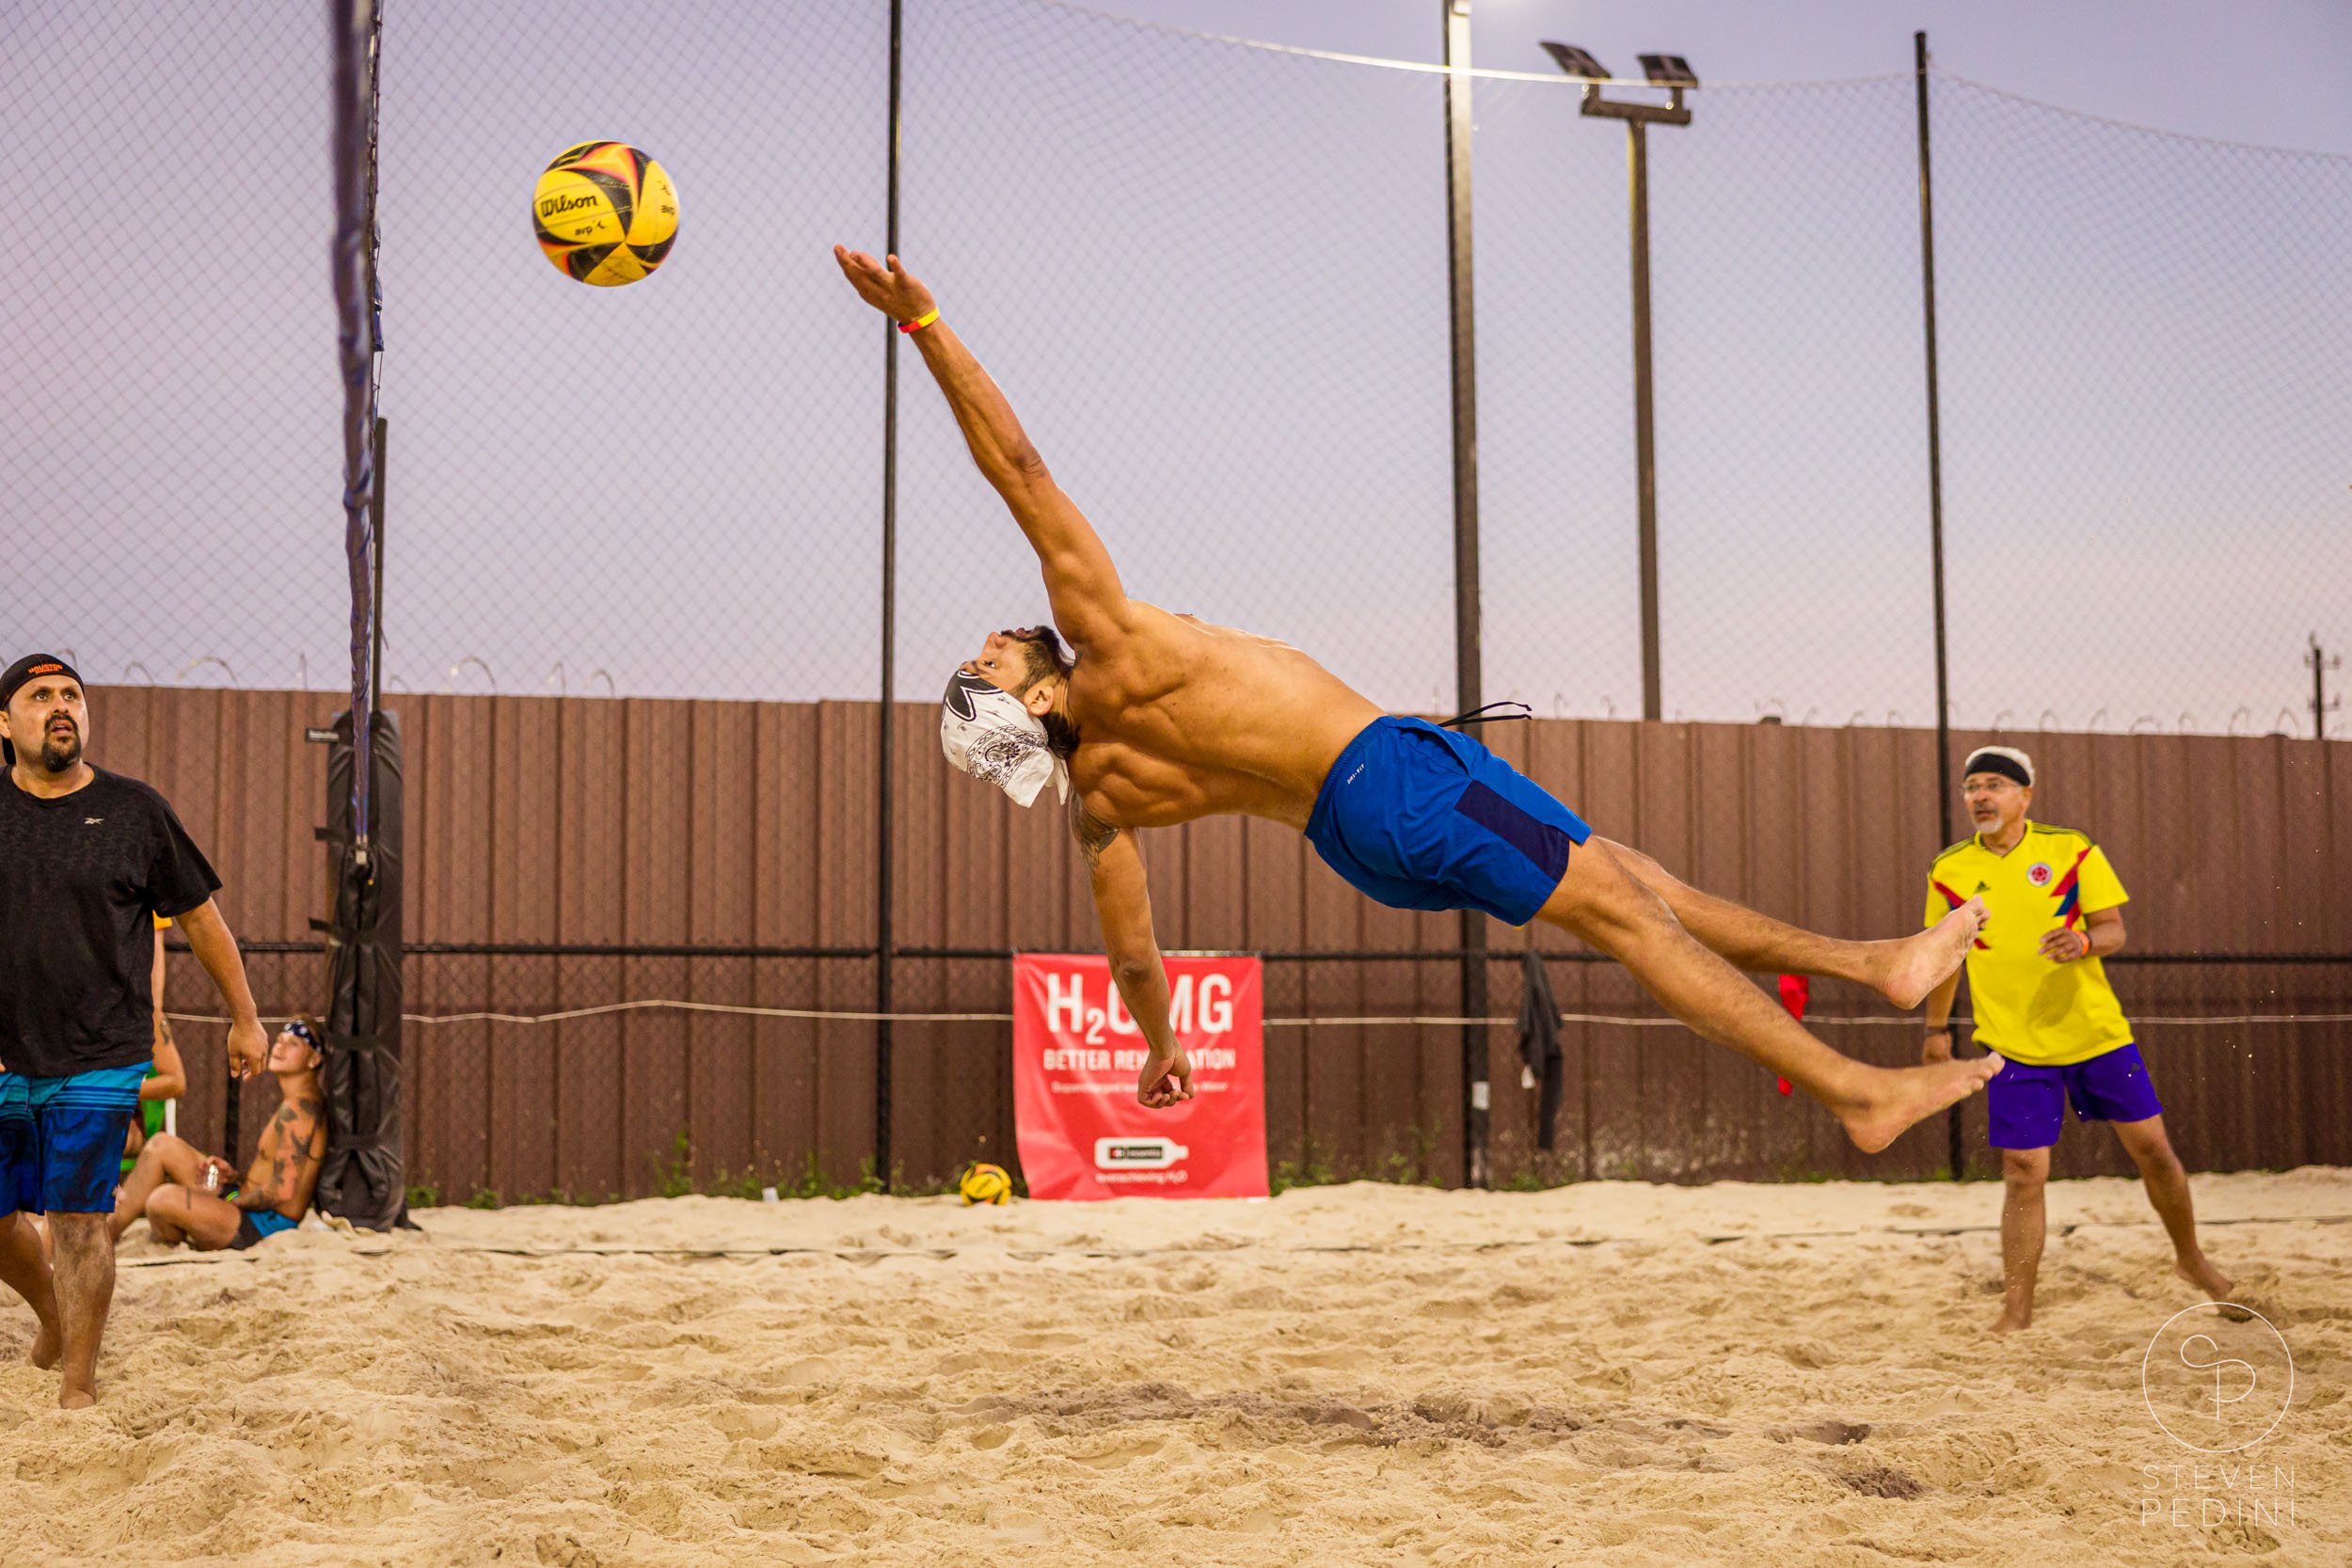 Steven Pedini Photography - Bumpy Pickle - Sand Volleyball - Houston TX - World Cup of Volleyball - 00291.jpg